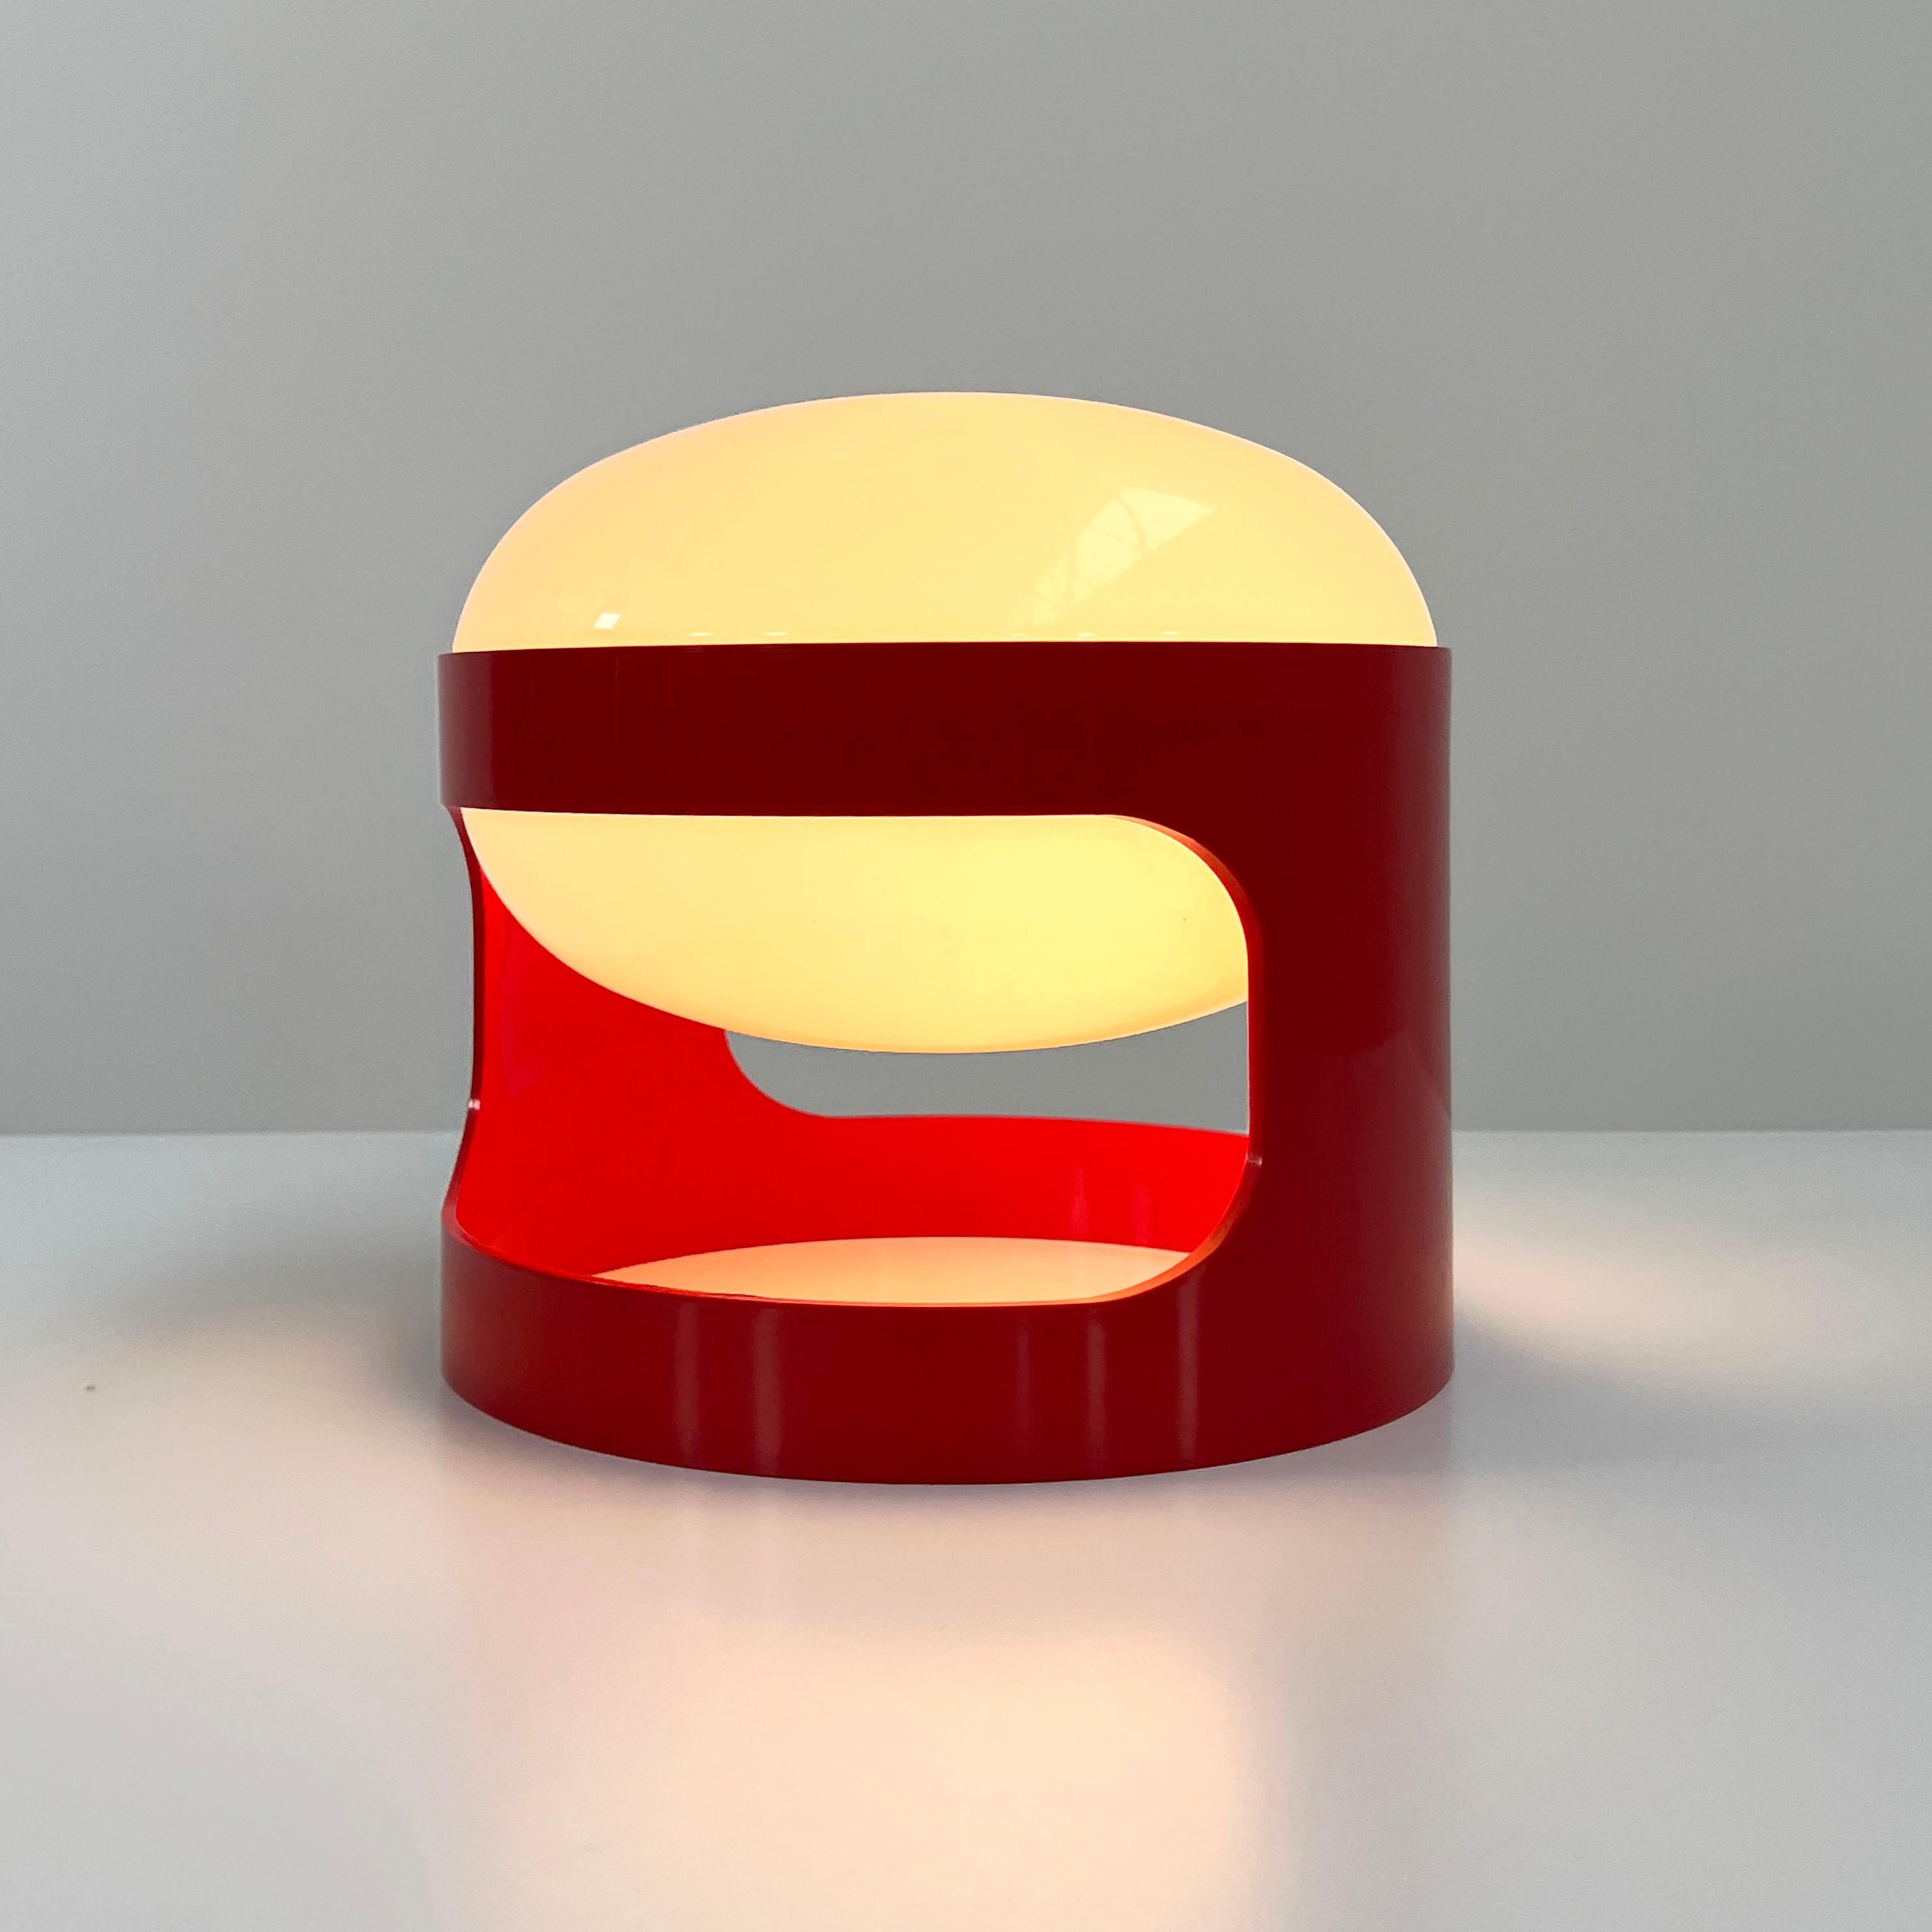 Designer - Joe Colombo
Producer - Kartell
Model - KD 27
Design Period - Seventies
Measurements - width 25 cm x depth 25 cm x height 26 cm
Materials - Plastic
Color - Red, White
Condition - Good 
Comments - Light wear consistent with age and use.